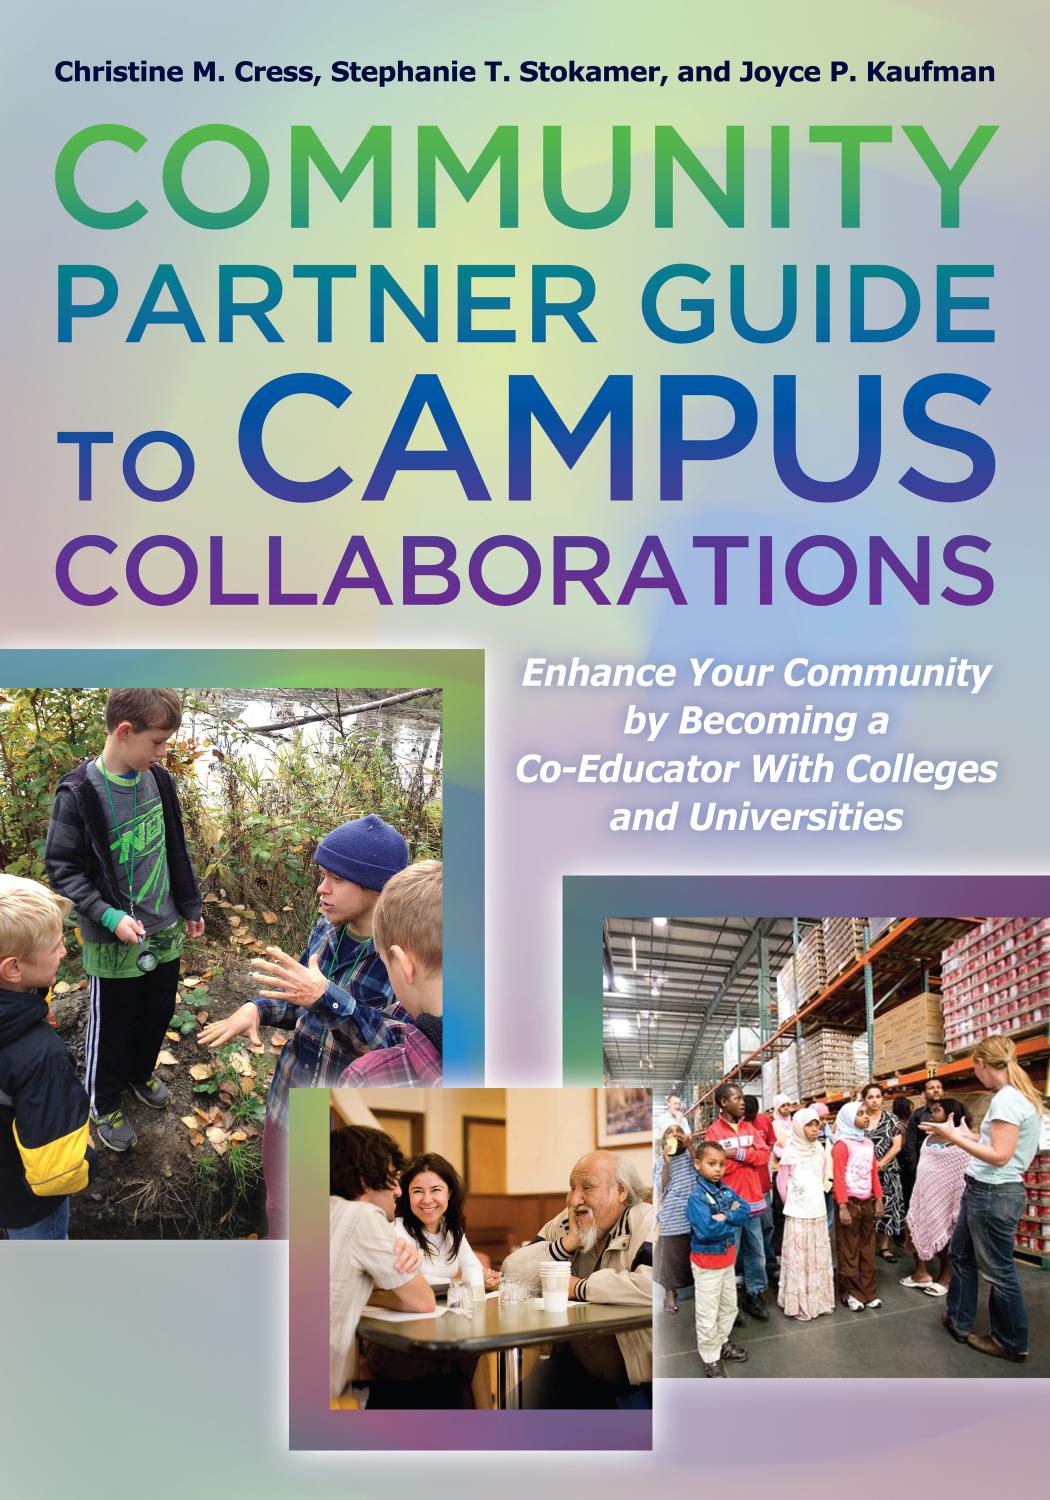 Community Partner Guide to Campus Collaborations : Enhance Your Community by Becoming a Co-Educator with Colleges and Universities by Christine M. Cress; Stephanie T. Stokamer; Joyce P. Kaufman